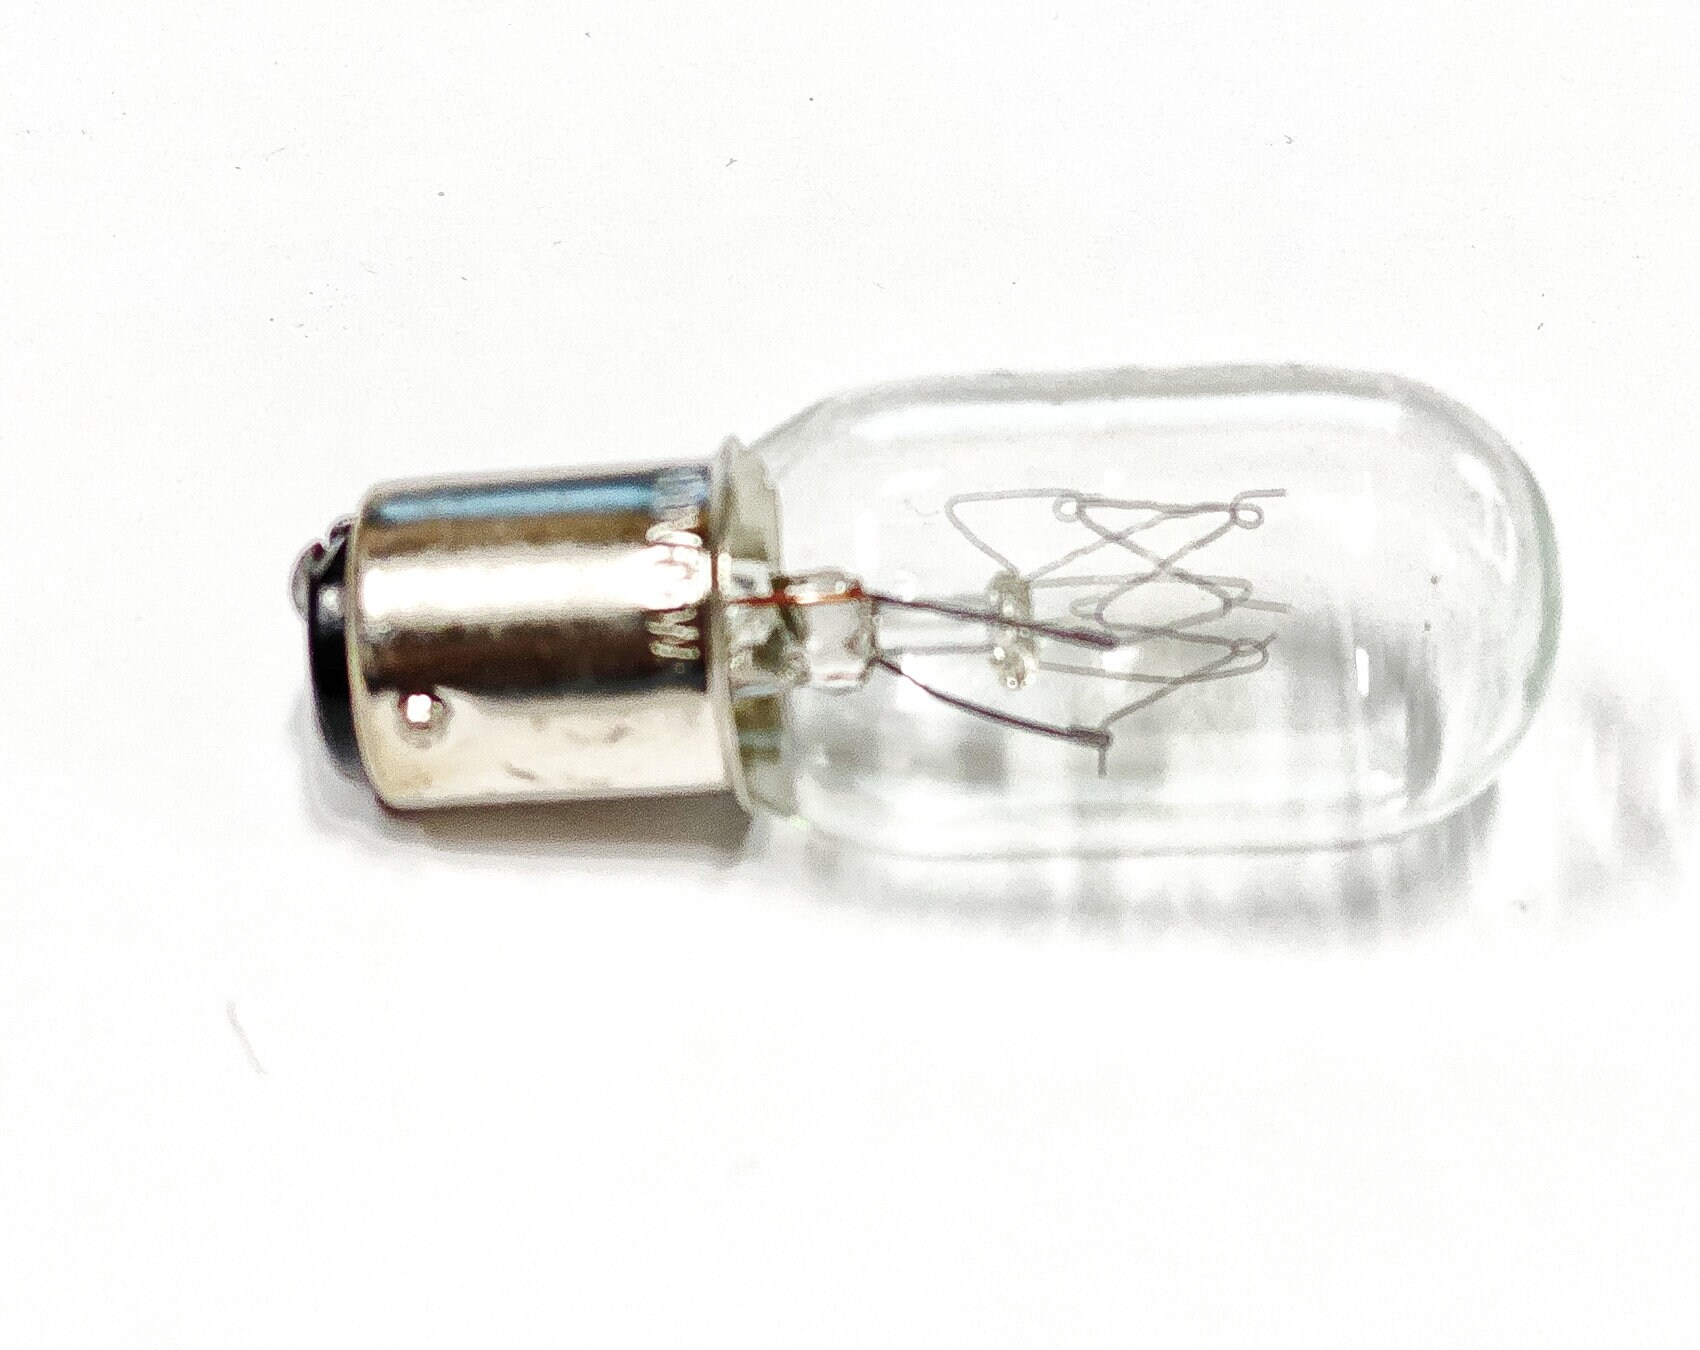 Sewing Machine Light BULB B15, 110V, 7W Use for Fridge, Microwave & Others  